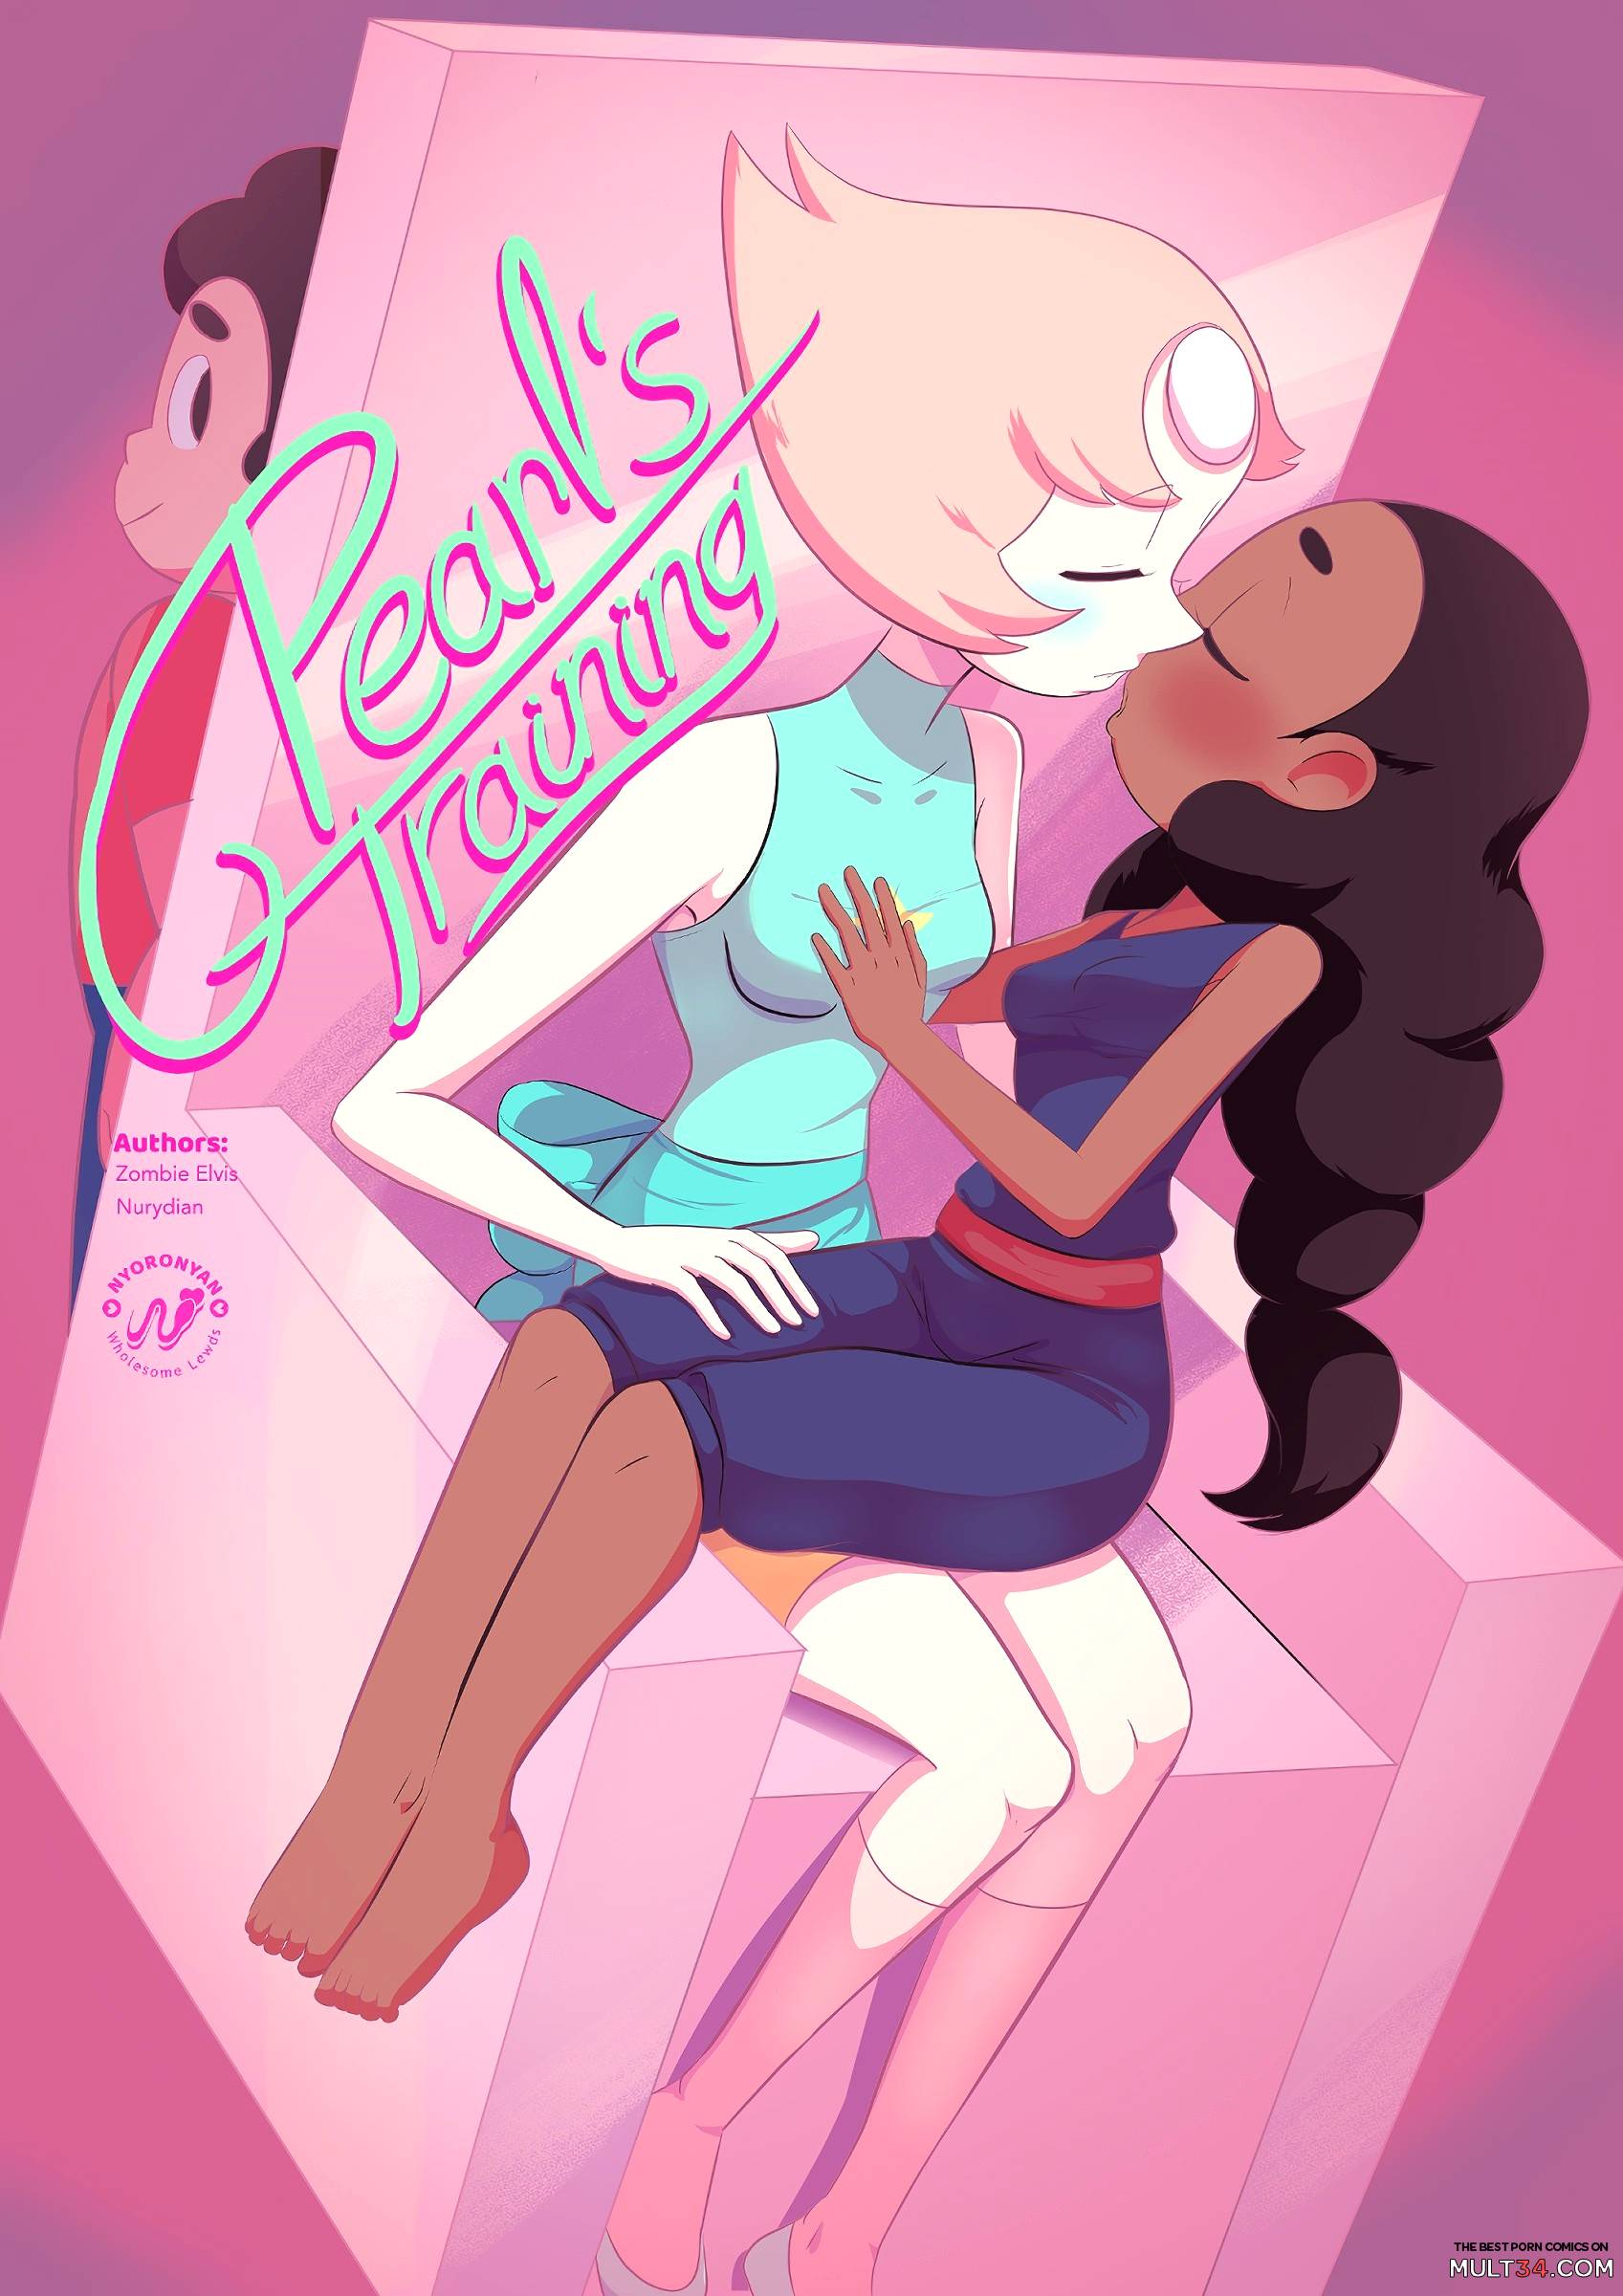 Get turned on by the sexiest Steven Universe gay porn comics!